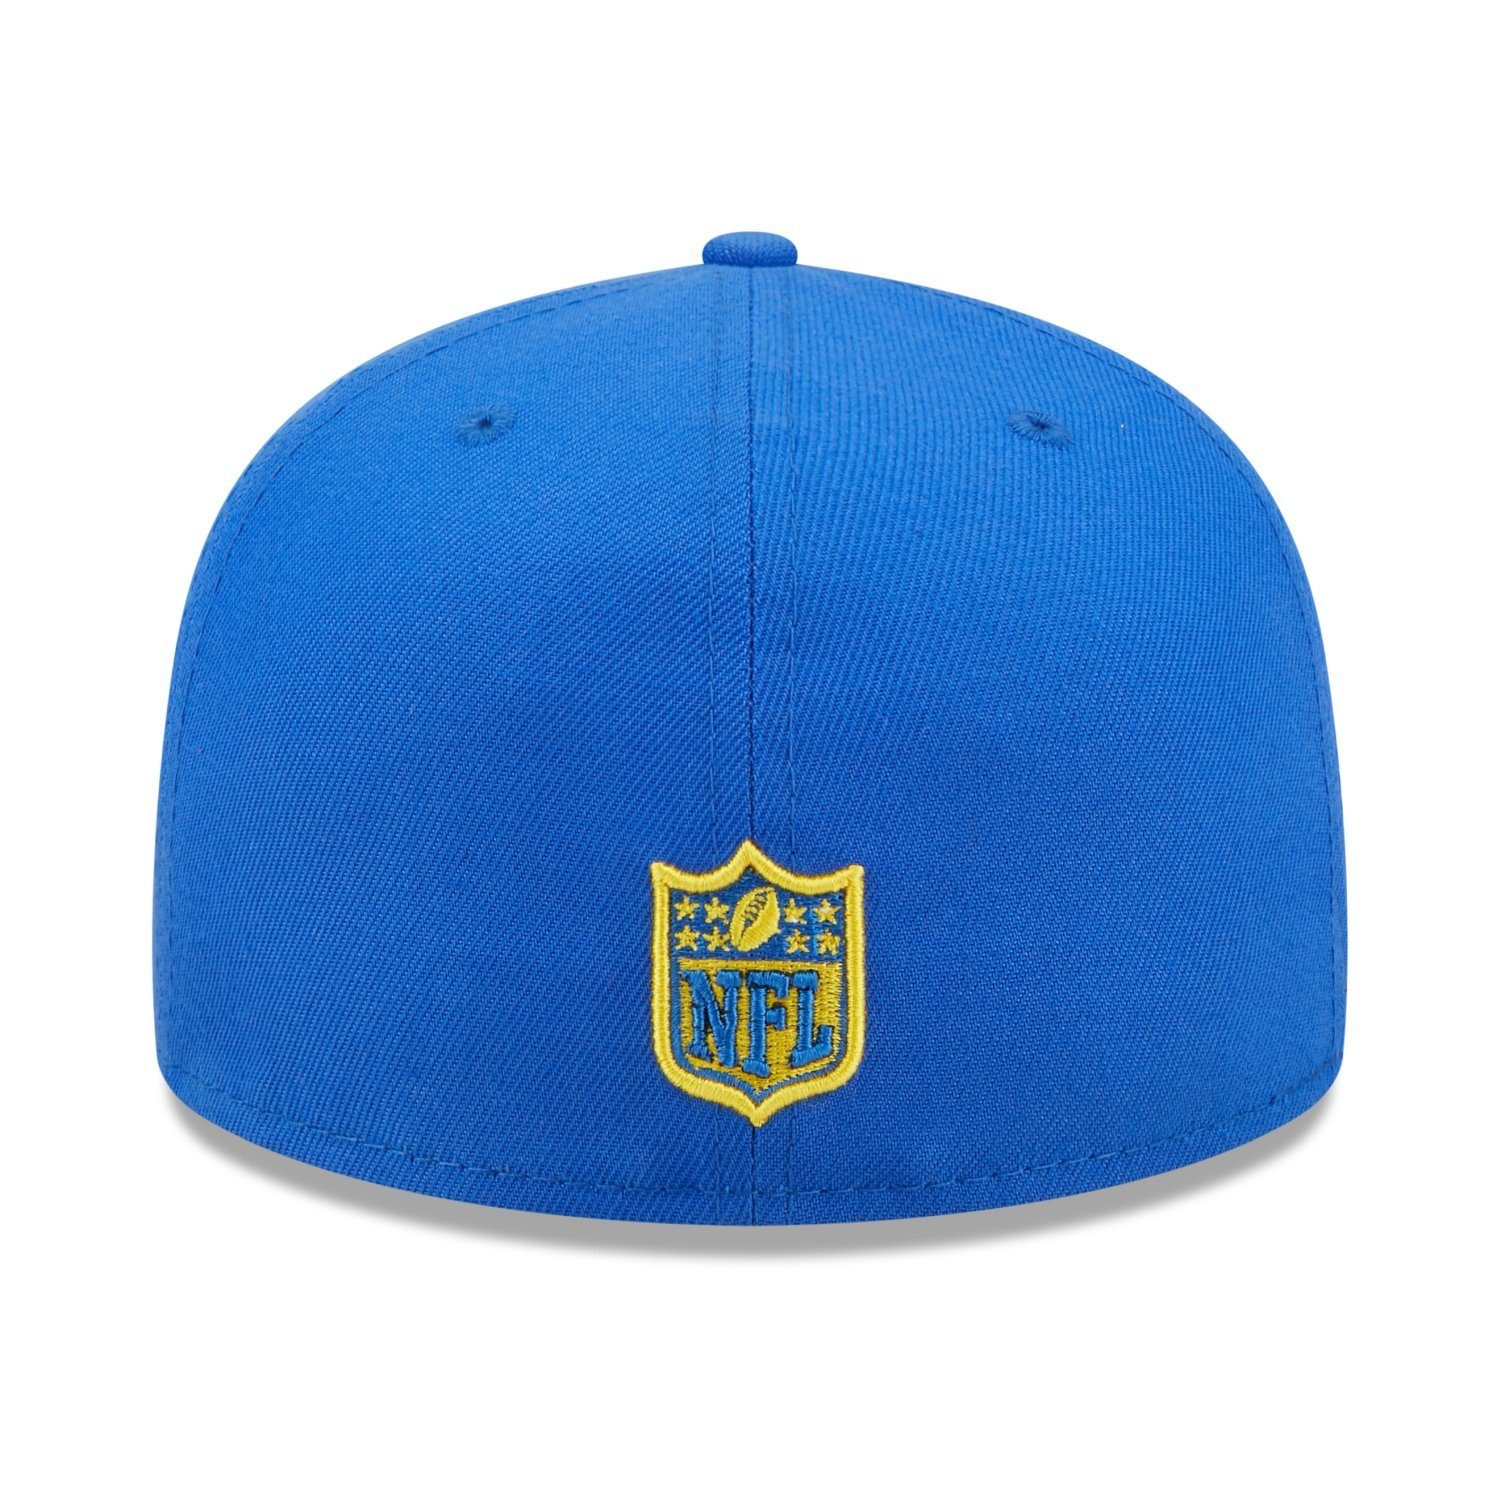 Cap New GROOVY Los Era 59Fifty Rams Angeles Fitted